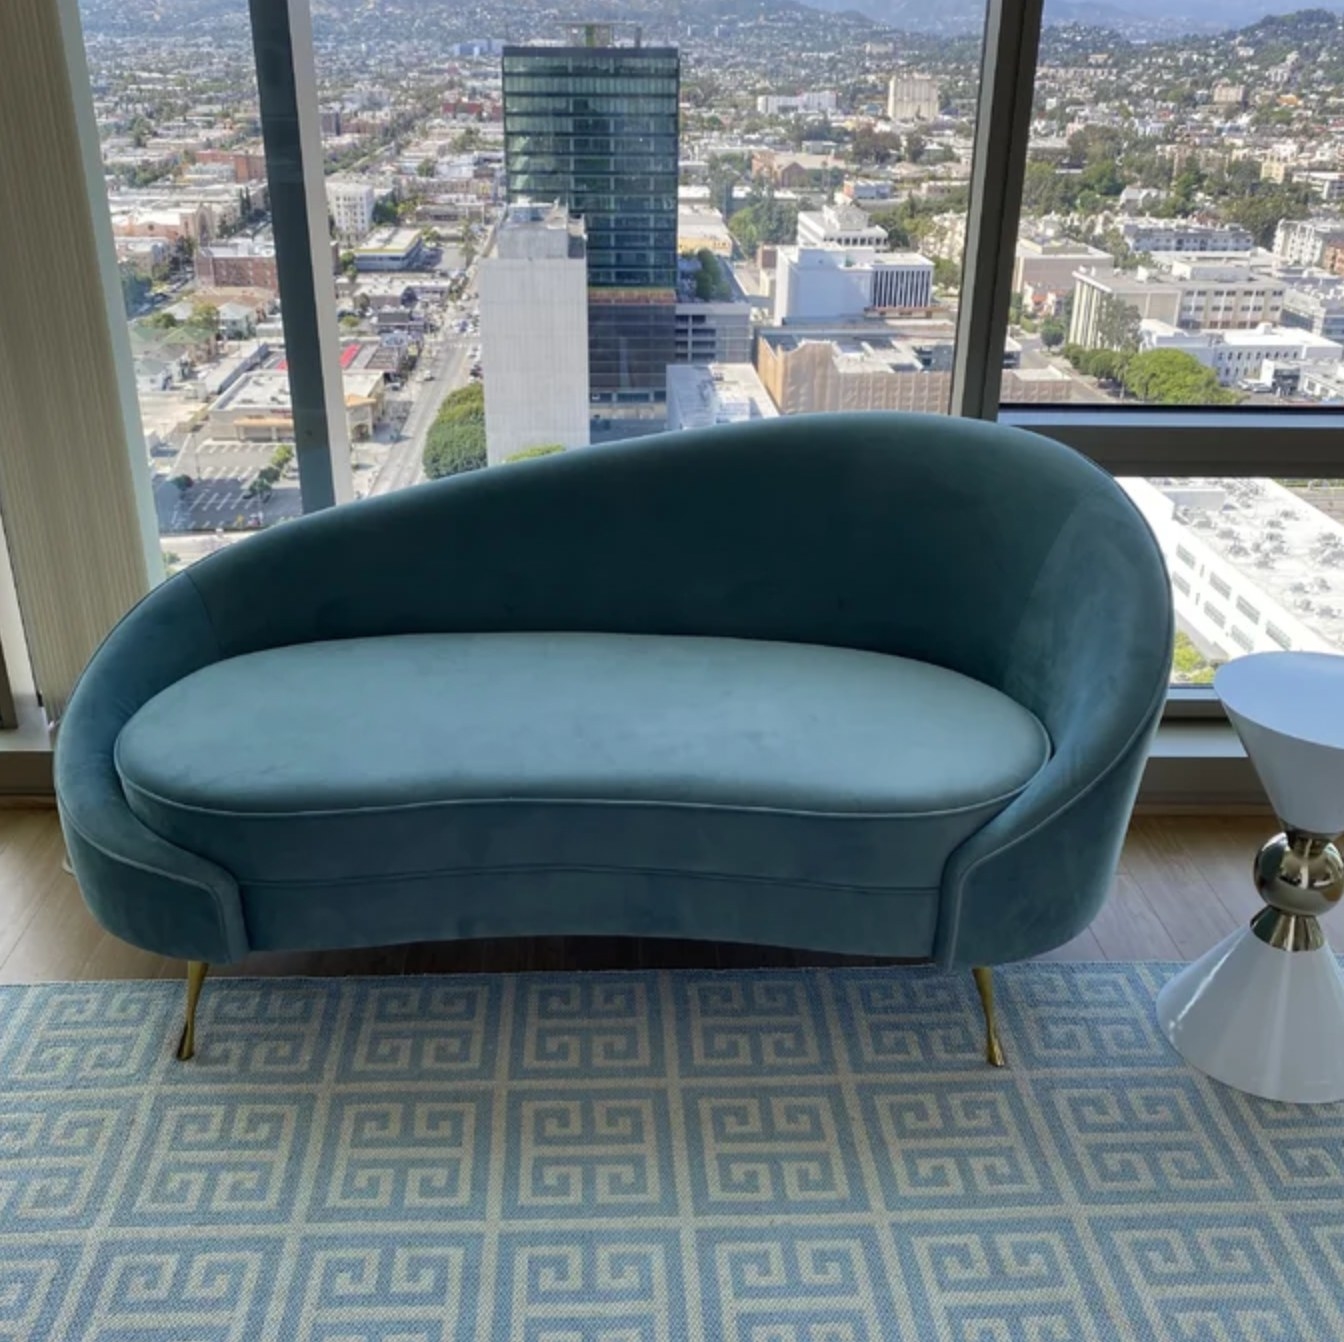 customer image of blue chaise lounge